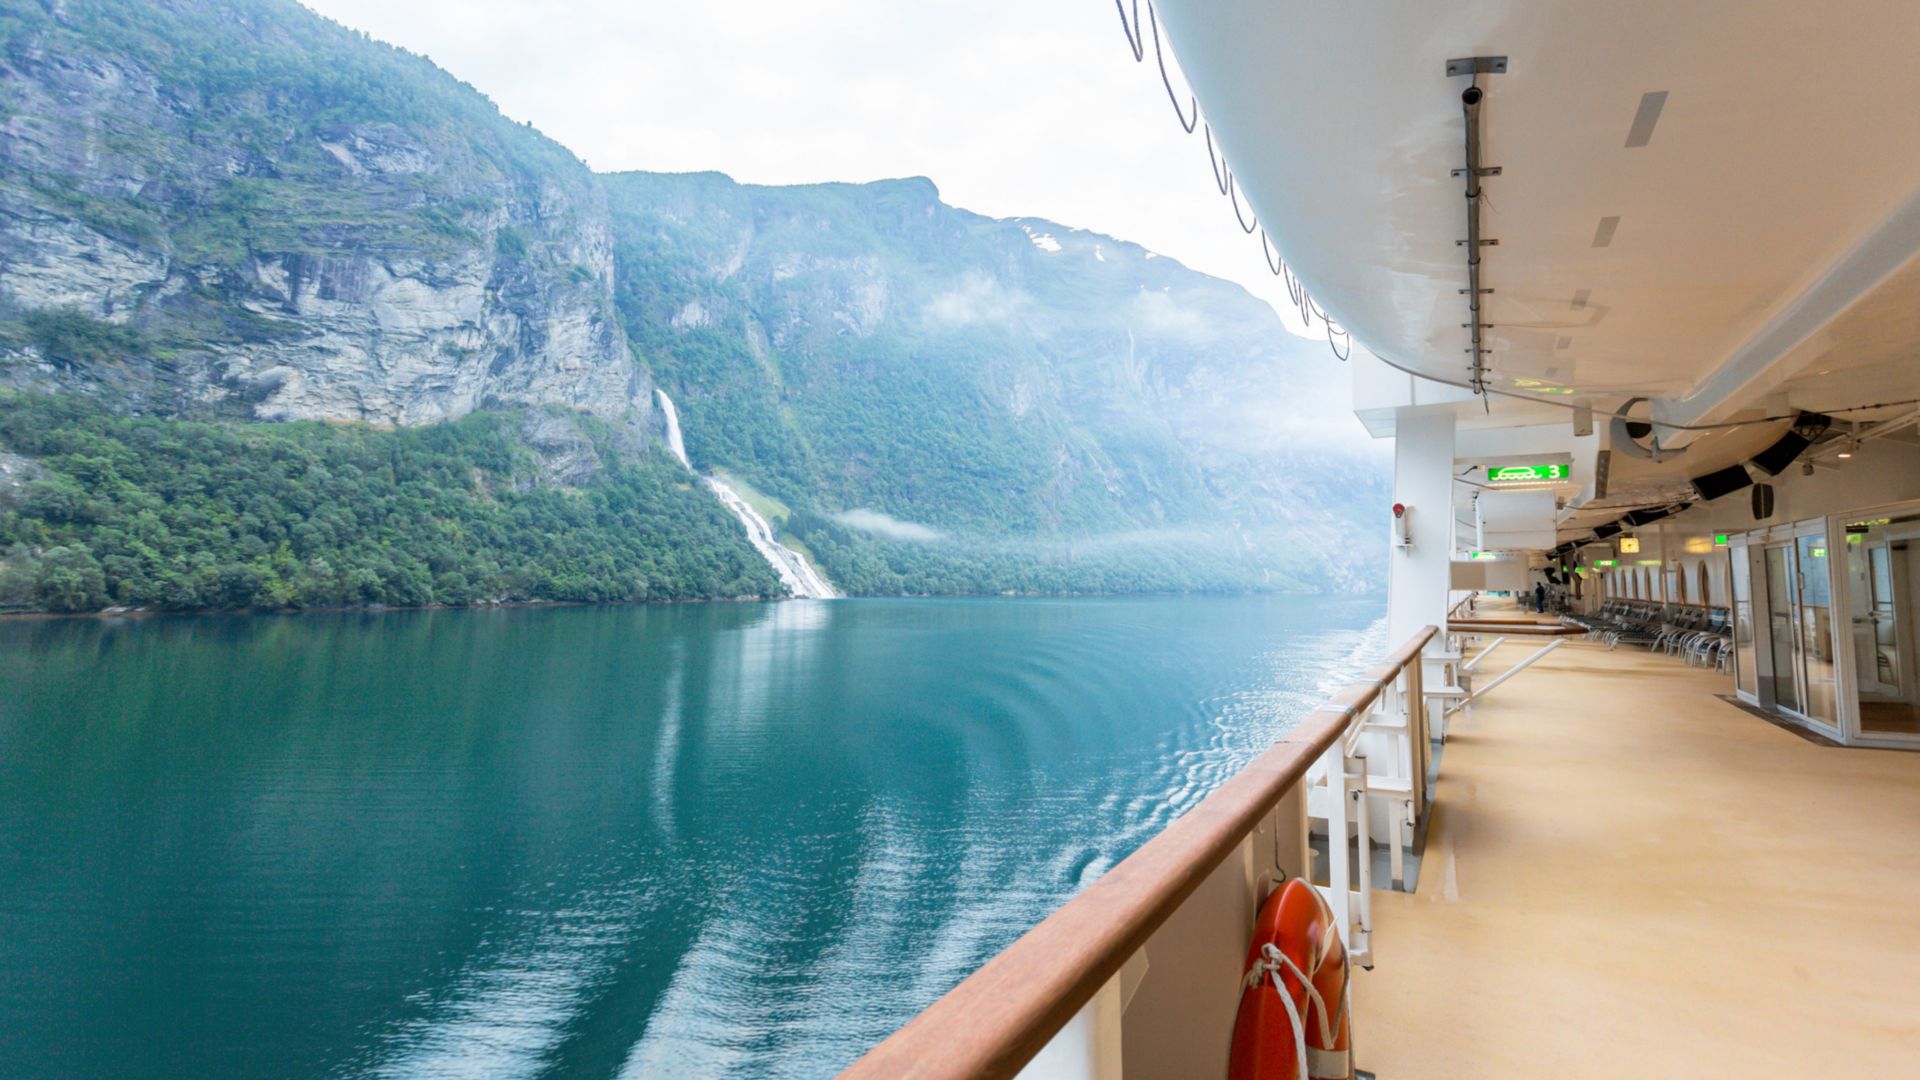 View from a cruise ship to the mountains